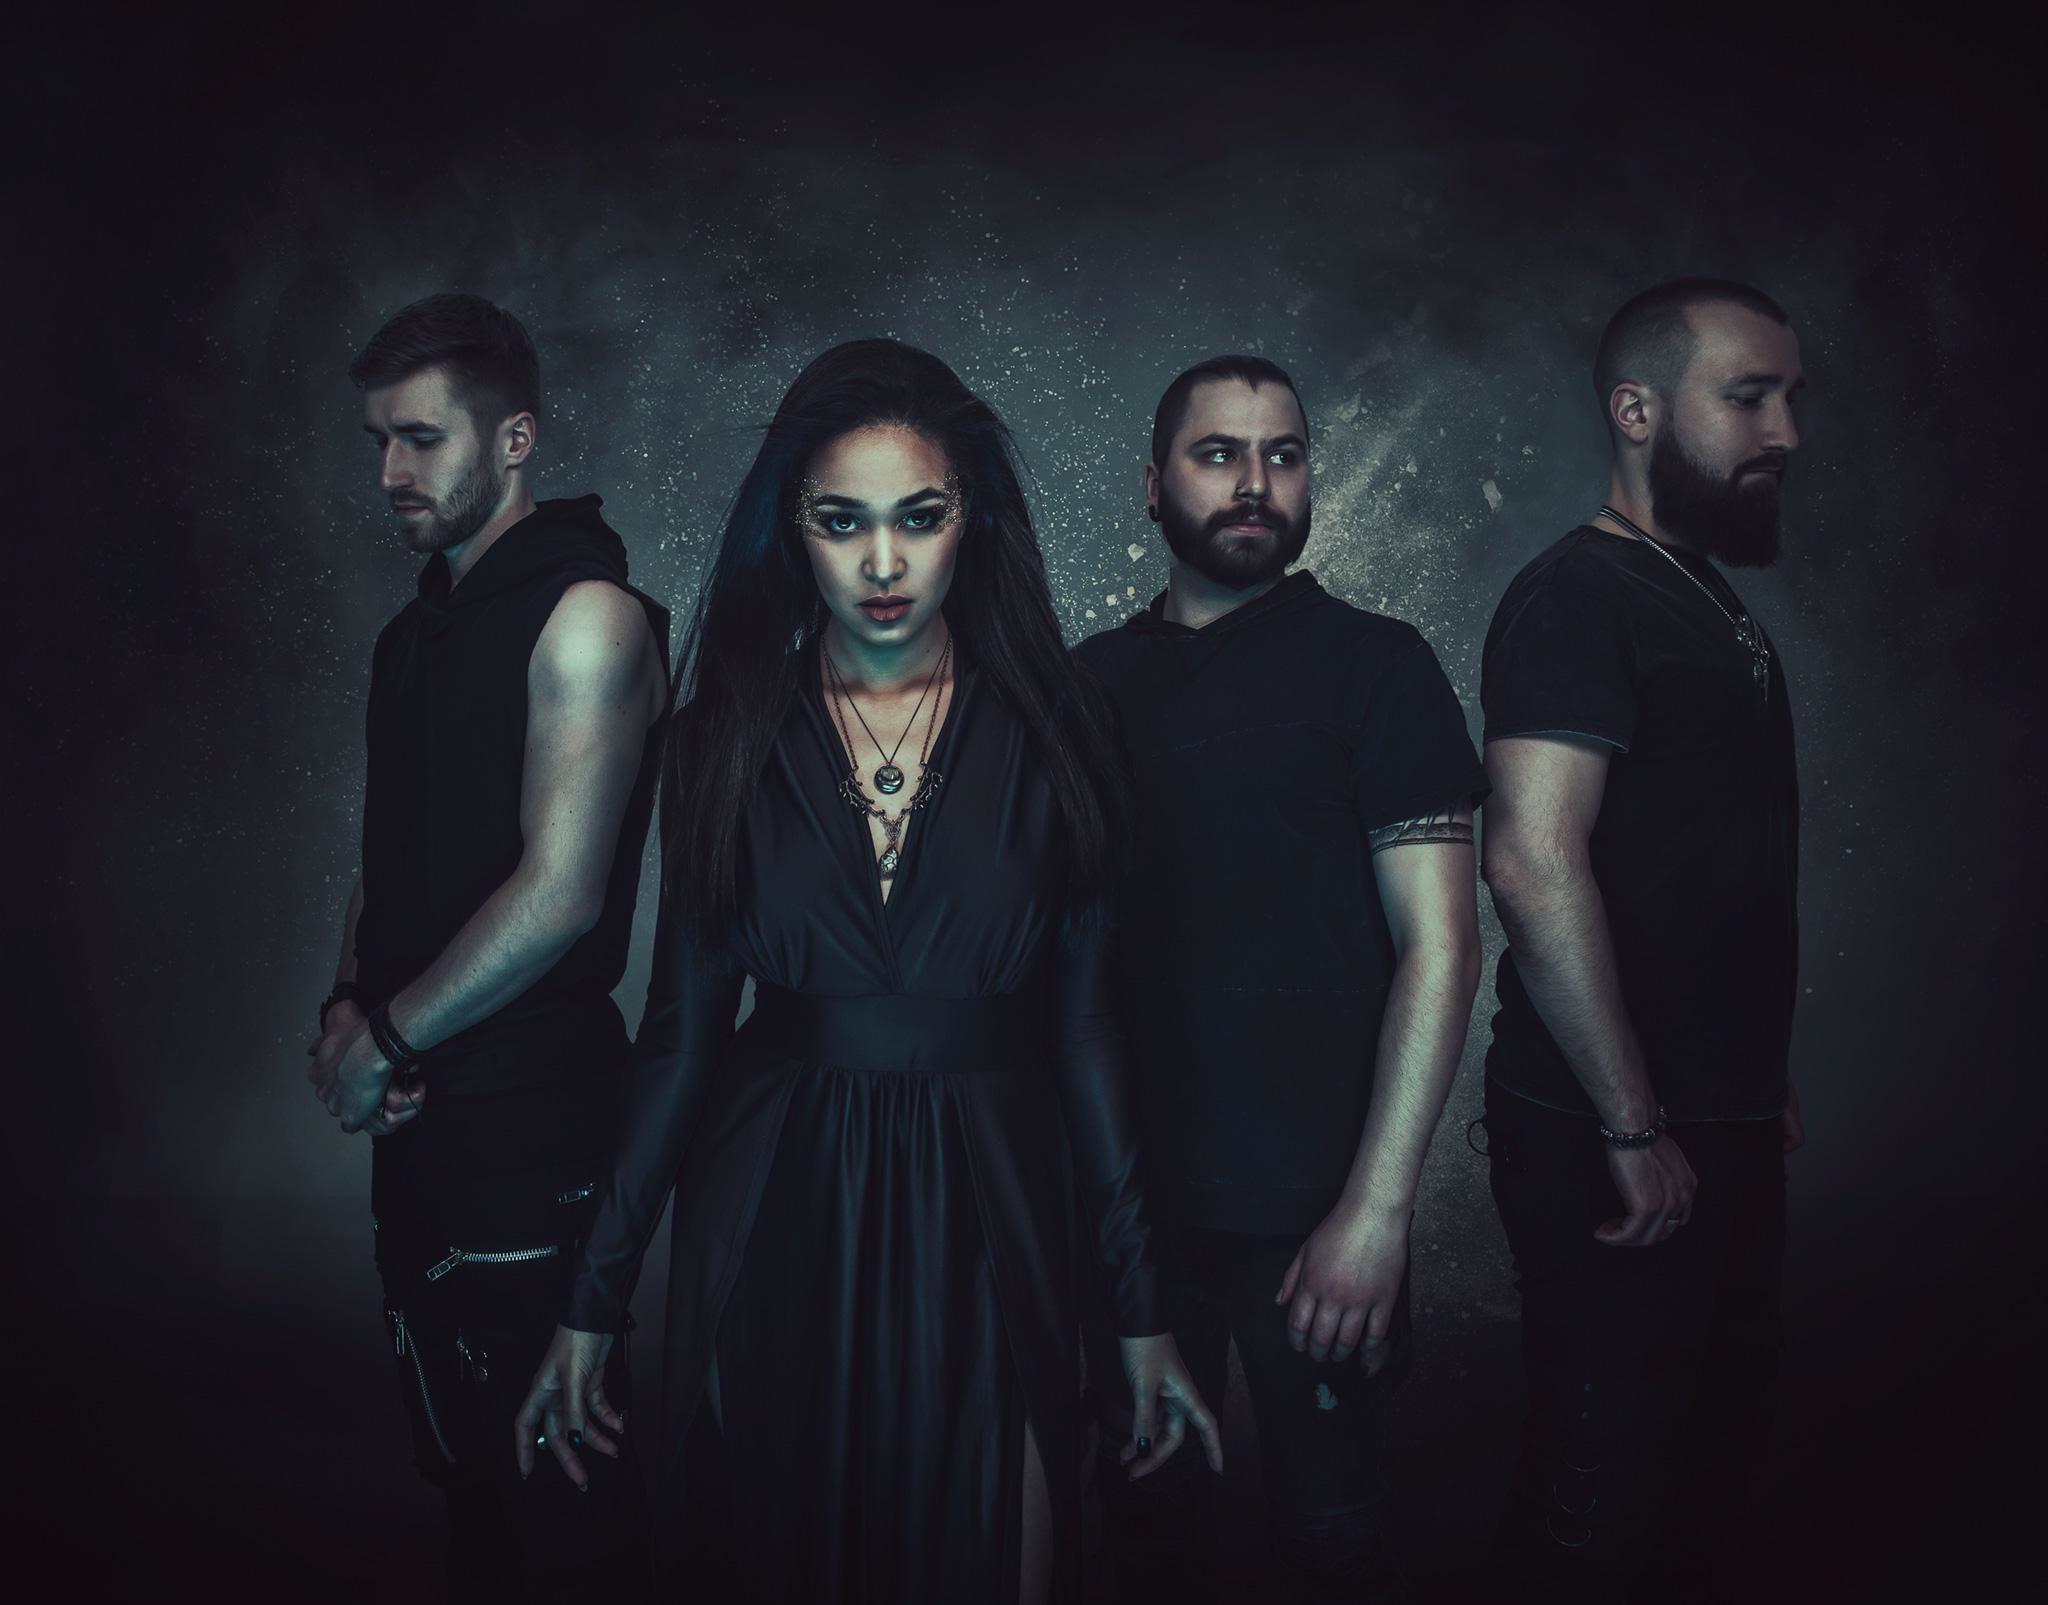 Four people, three men and one woman, ad infinitum stand in a dark, moody setting, dressed in black, with a focus on the woman in the center.